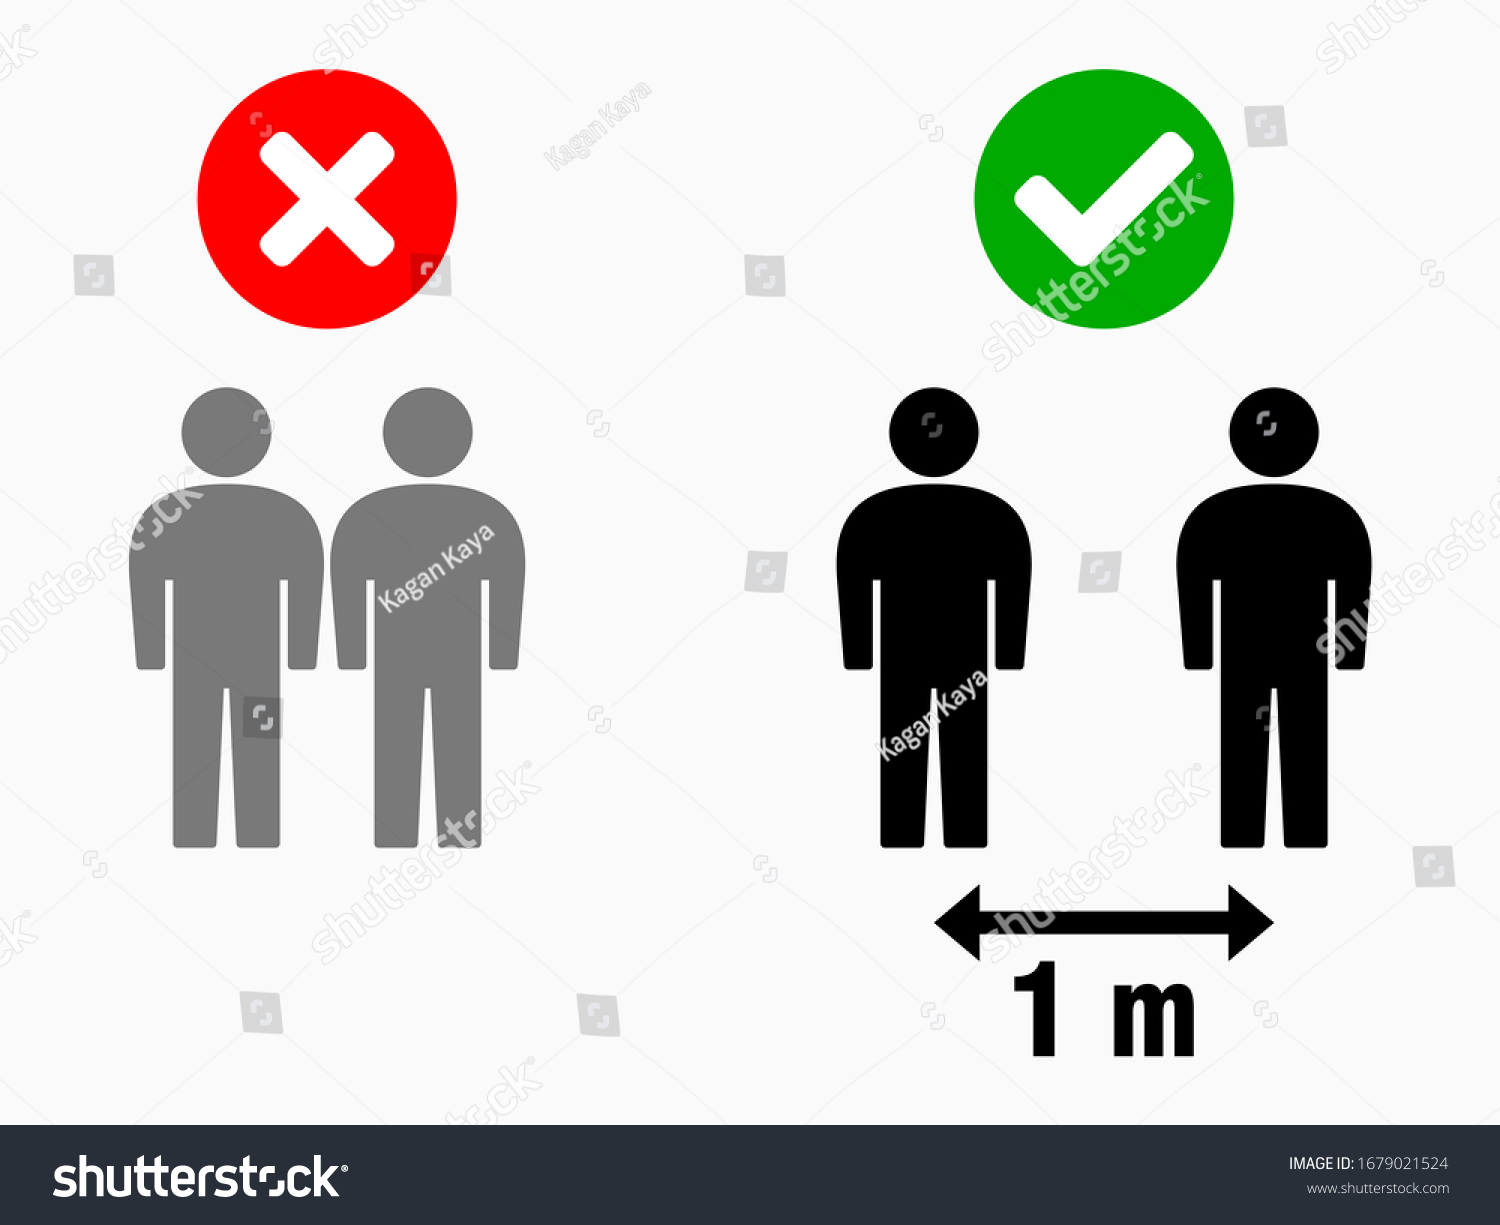 Social Distancing Keep Your Distance 1 m or 1 Metre Infographic Icon. Vector Image. #1679021524